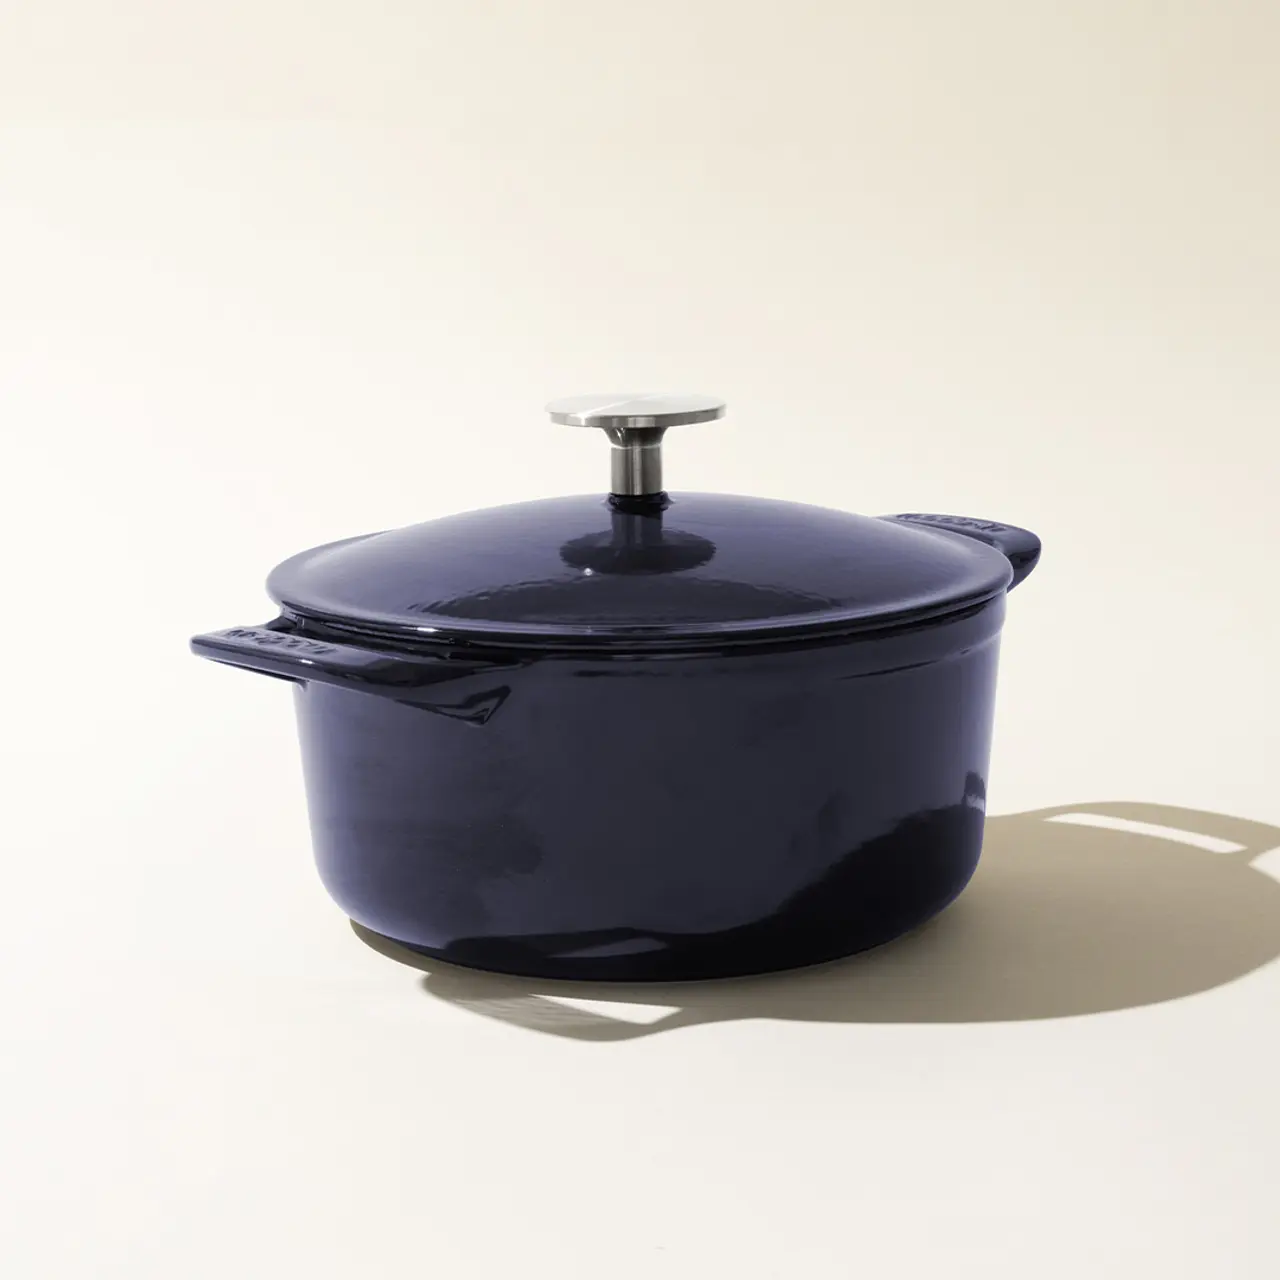 A blue enameled cast iron Dutch oven with the lid on, sitting against a light background with a soft shadow to the right.